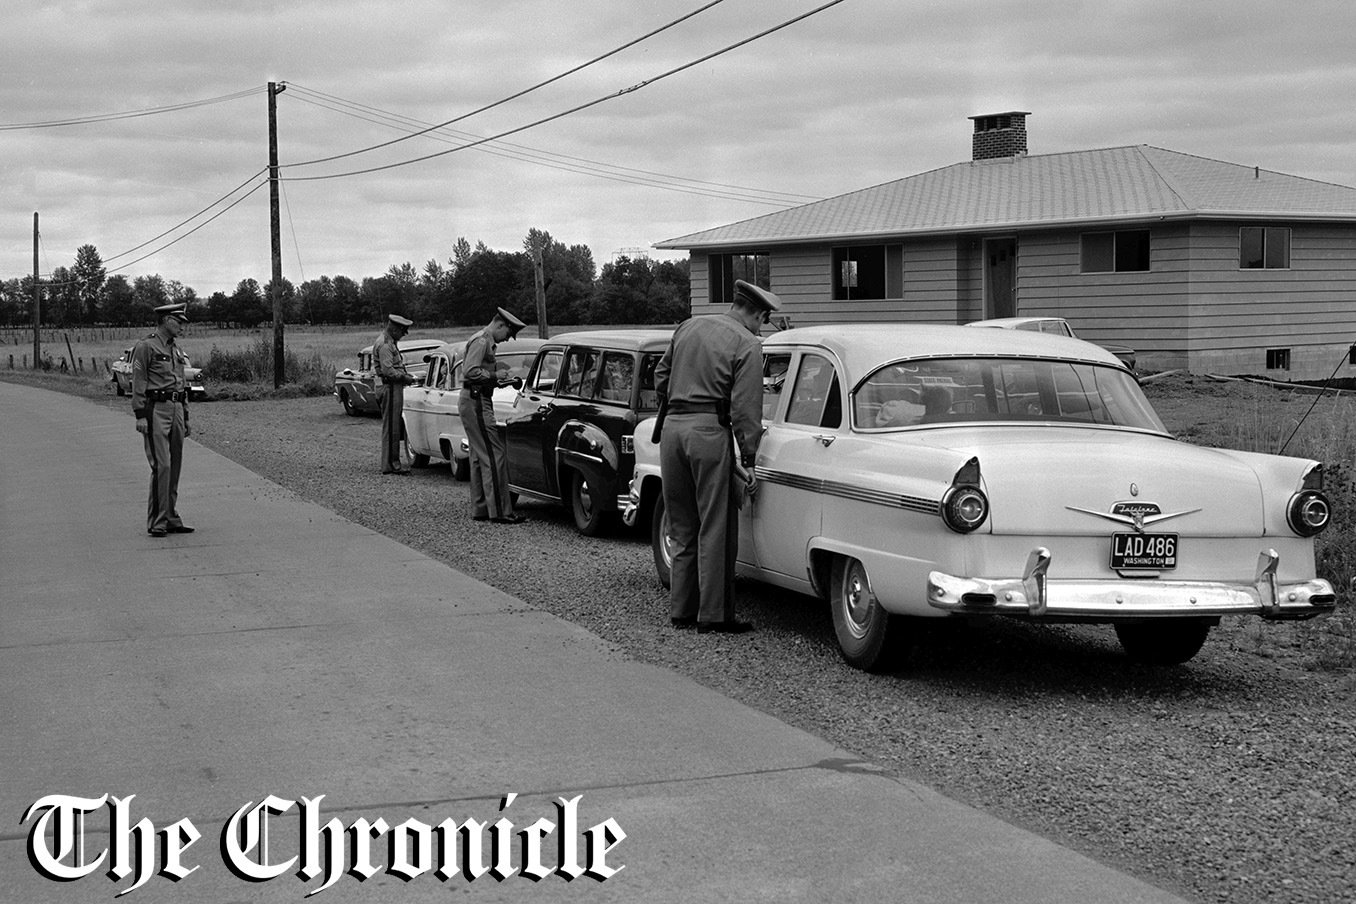 From the news clipping: “DRIVER SHAKEDOWN — Lewis County Drivers are getting what they’ve been looking for - a crackdown on drivers with expired operators’ licenses. Above, at left, State Patrol Sergt. Harold Cusie of Chehalis watches three patrolmen check drivers at a spot check location Saturday. That was at Mary’s Corner at intersection with former “99”. Of 178 drivers, there were three arrests and three warnings. Friday officers checked 201 cars, found nine drivers with expired licenses. - Chronicle Staff Photo.”